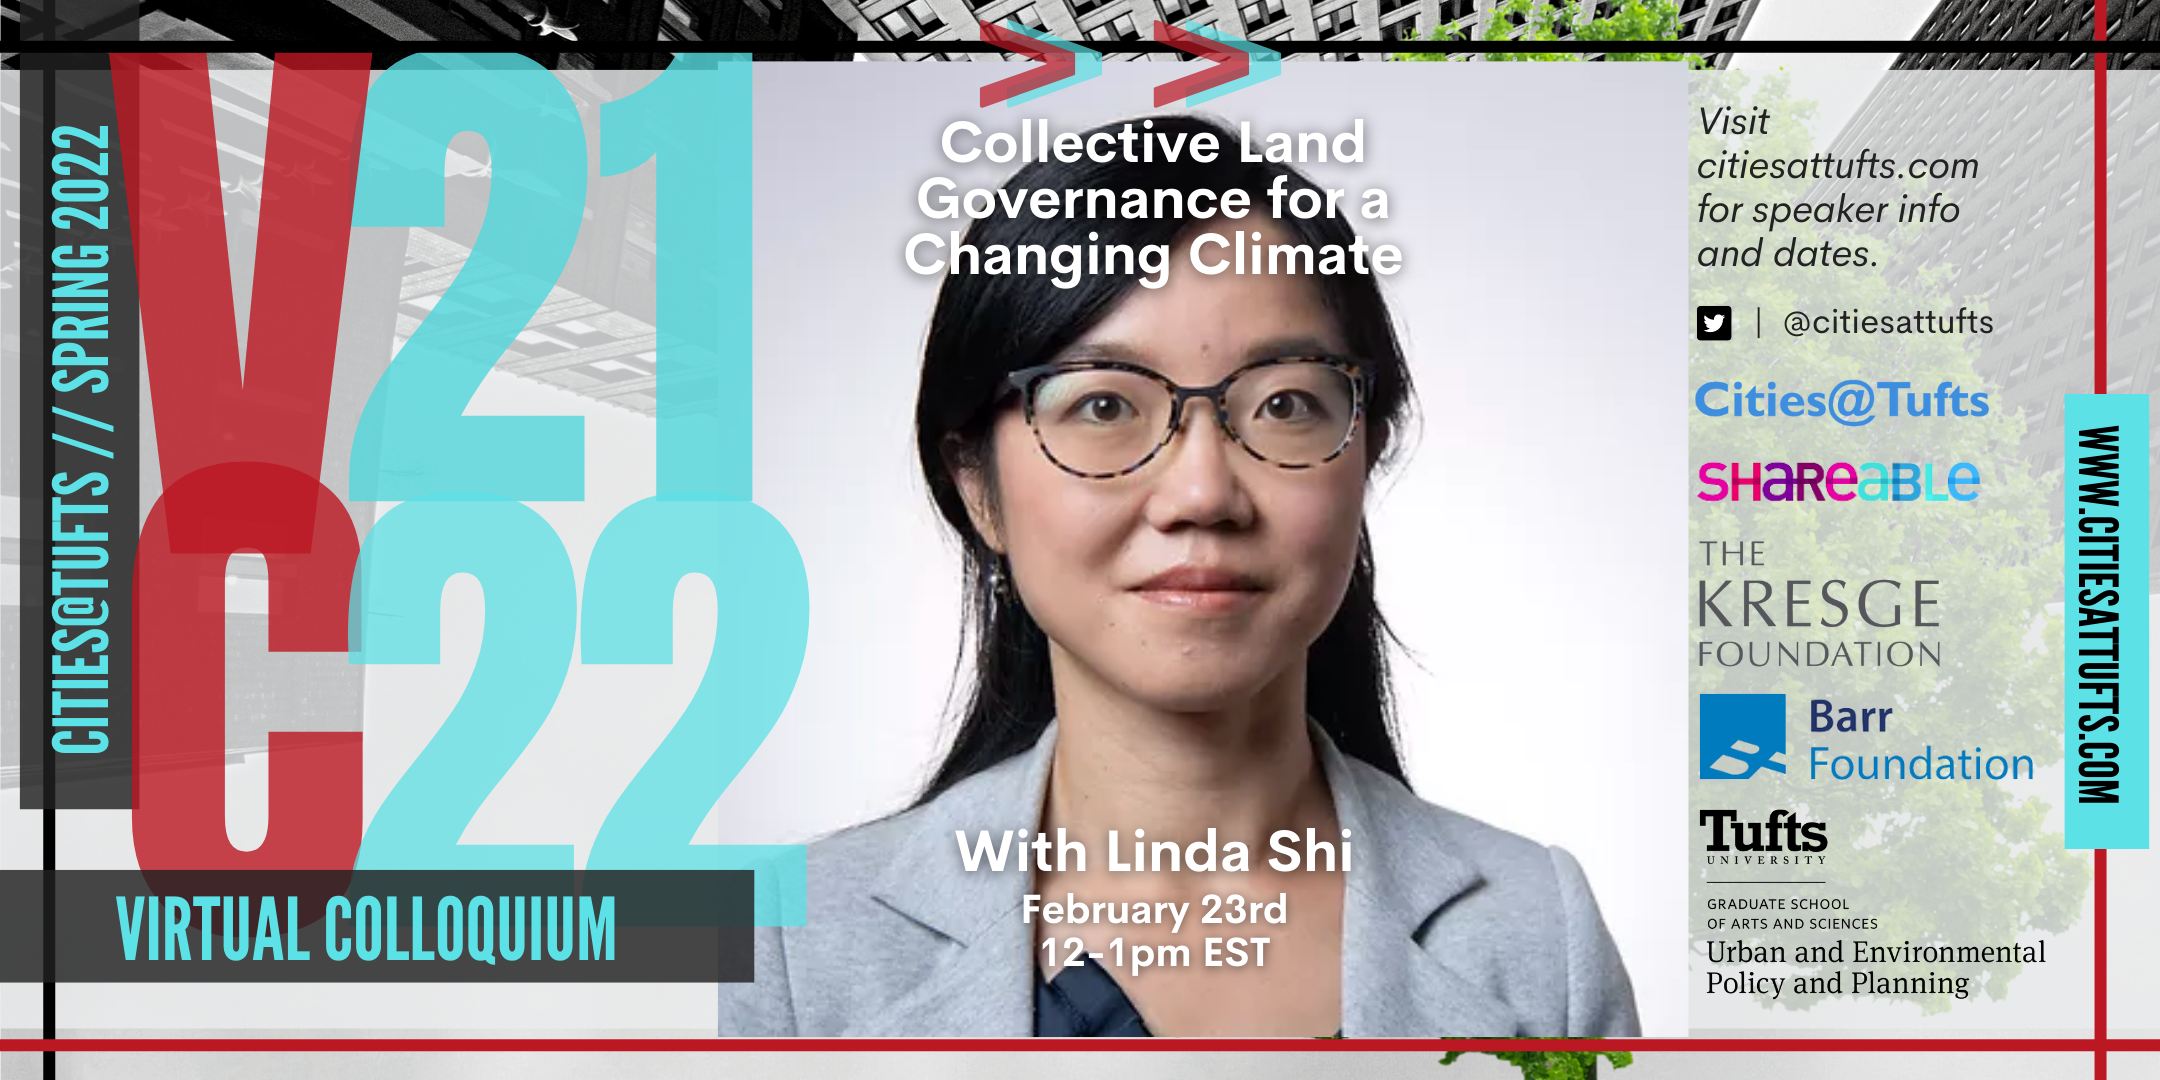 Cities@Tufts Collective Land Governance for a Changing Climate with Linda Shi